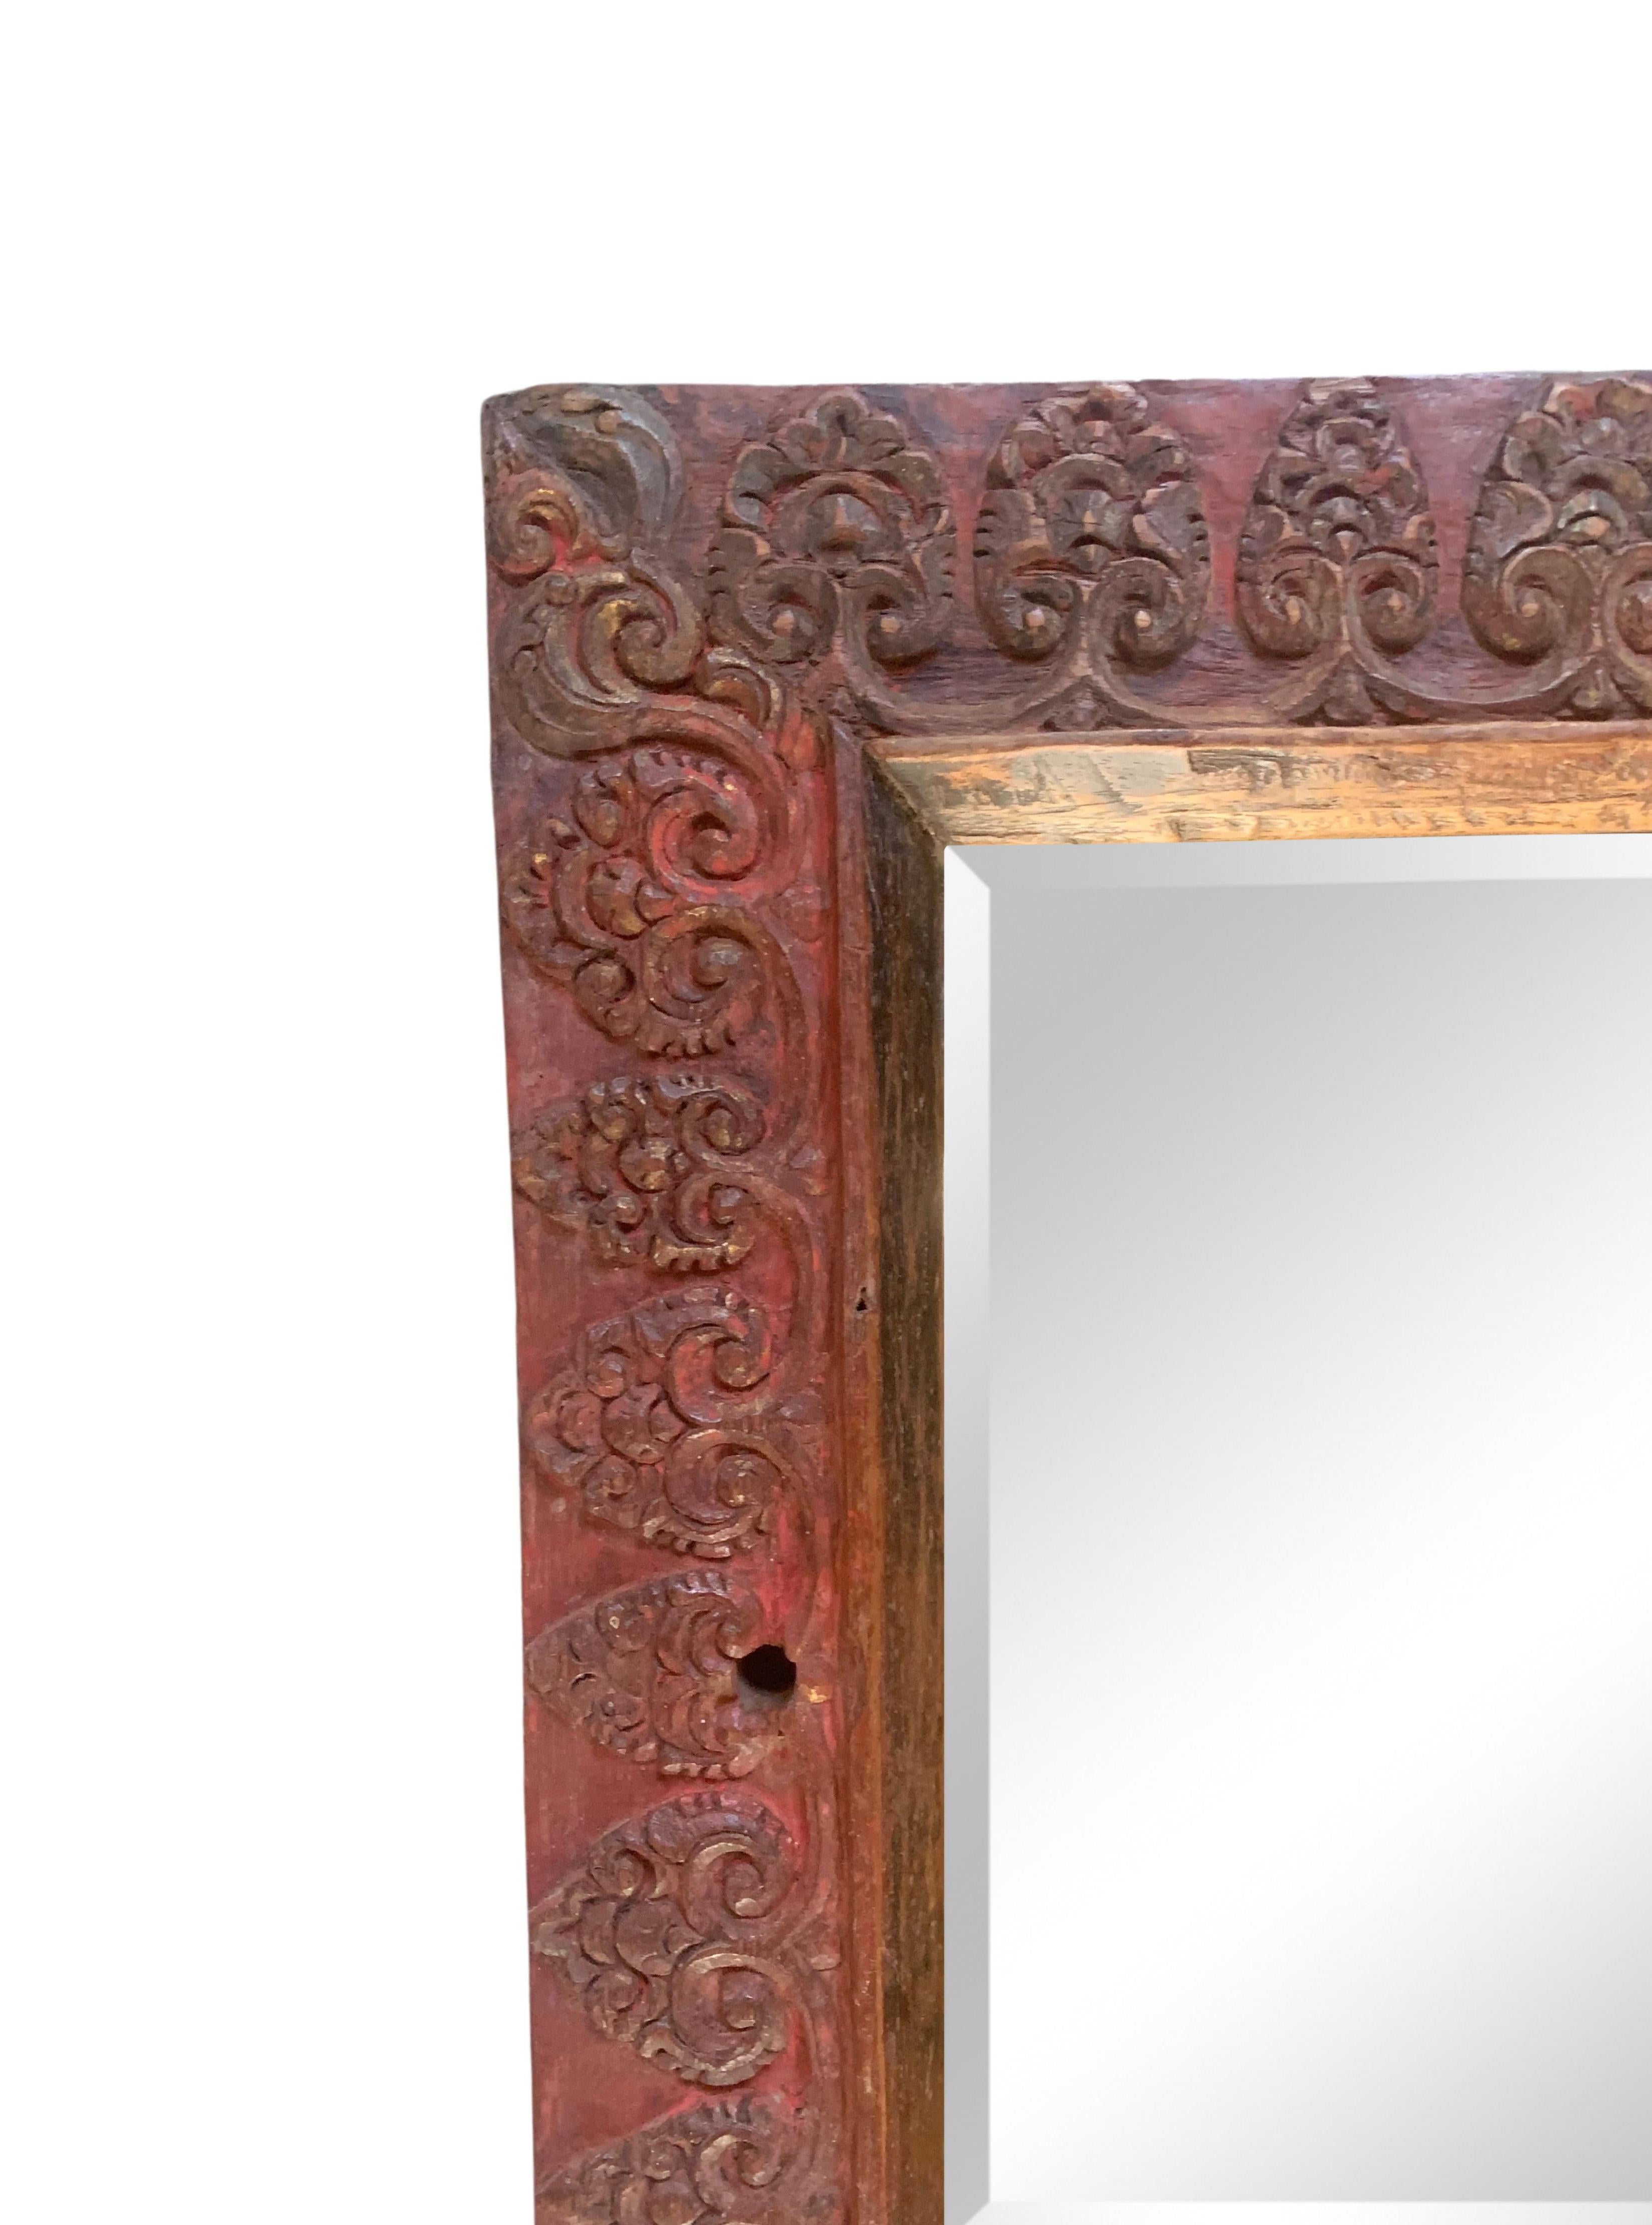 This mirror was crafted on the island of Bali around the mid-20th Century and features wonderful Balinese carved detailing and a red polychrome finish.